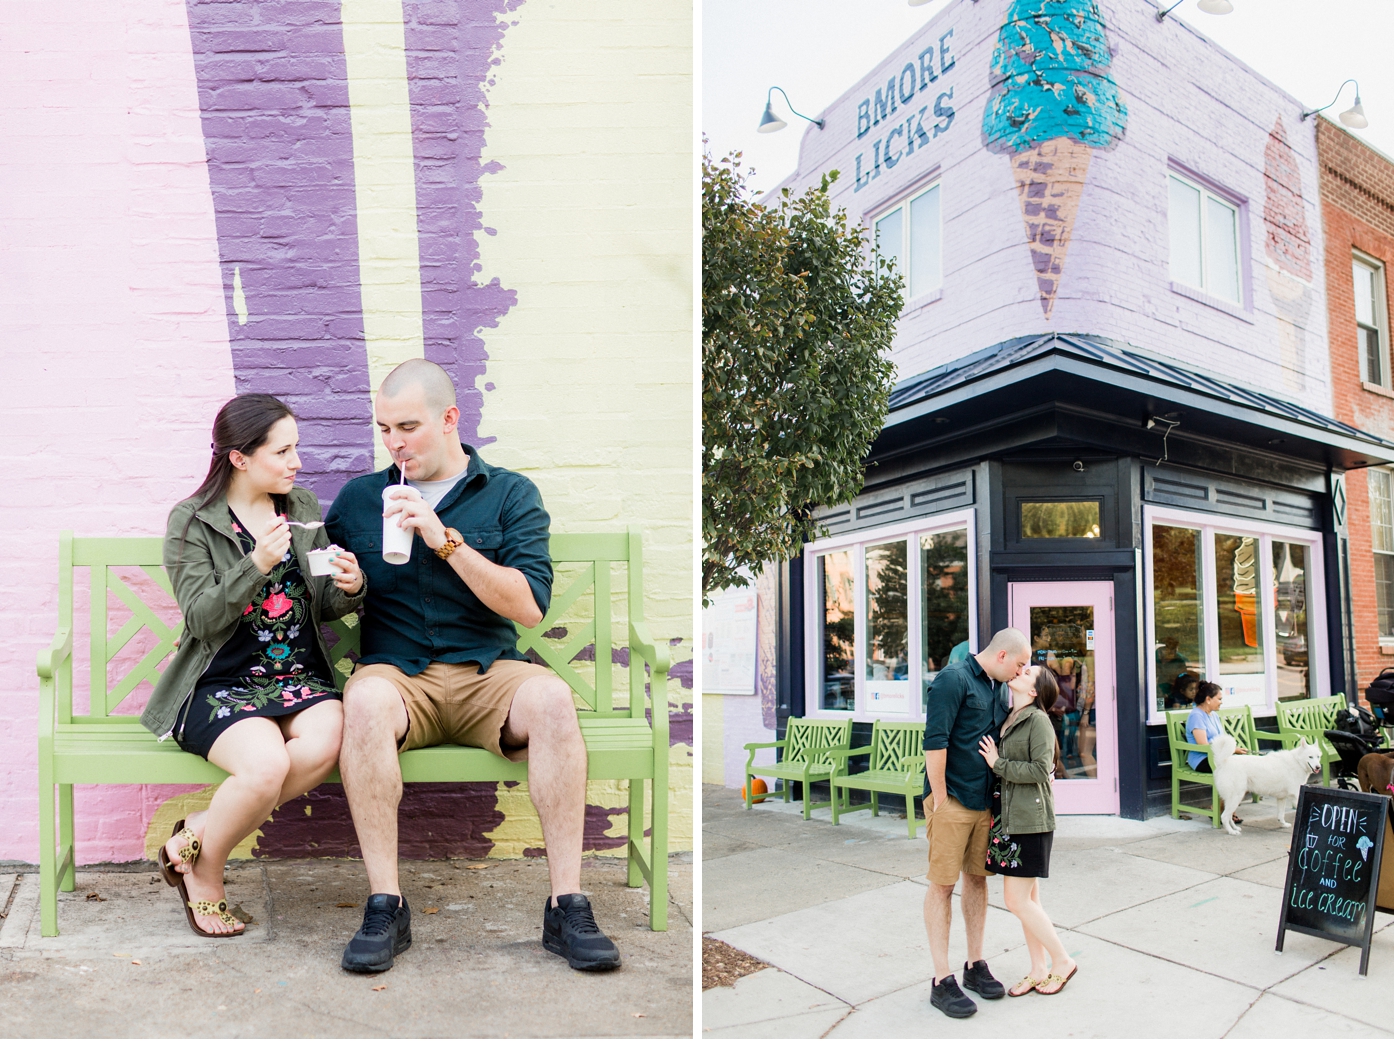 Baltimore Engagement Session at Bmore Licks by Alisandra Photography